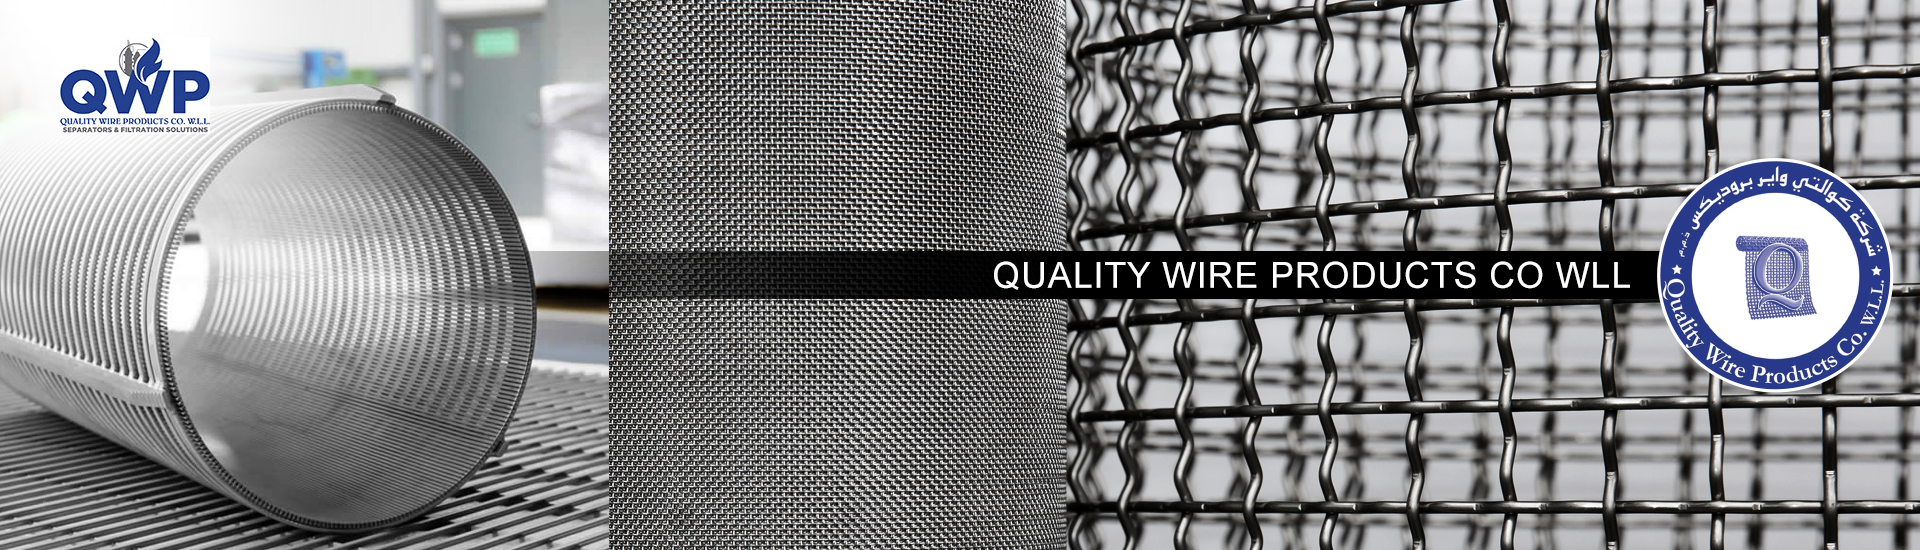 QUALITY WIRE PRODUCTS CO WLL